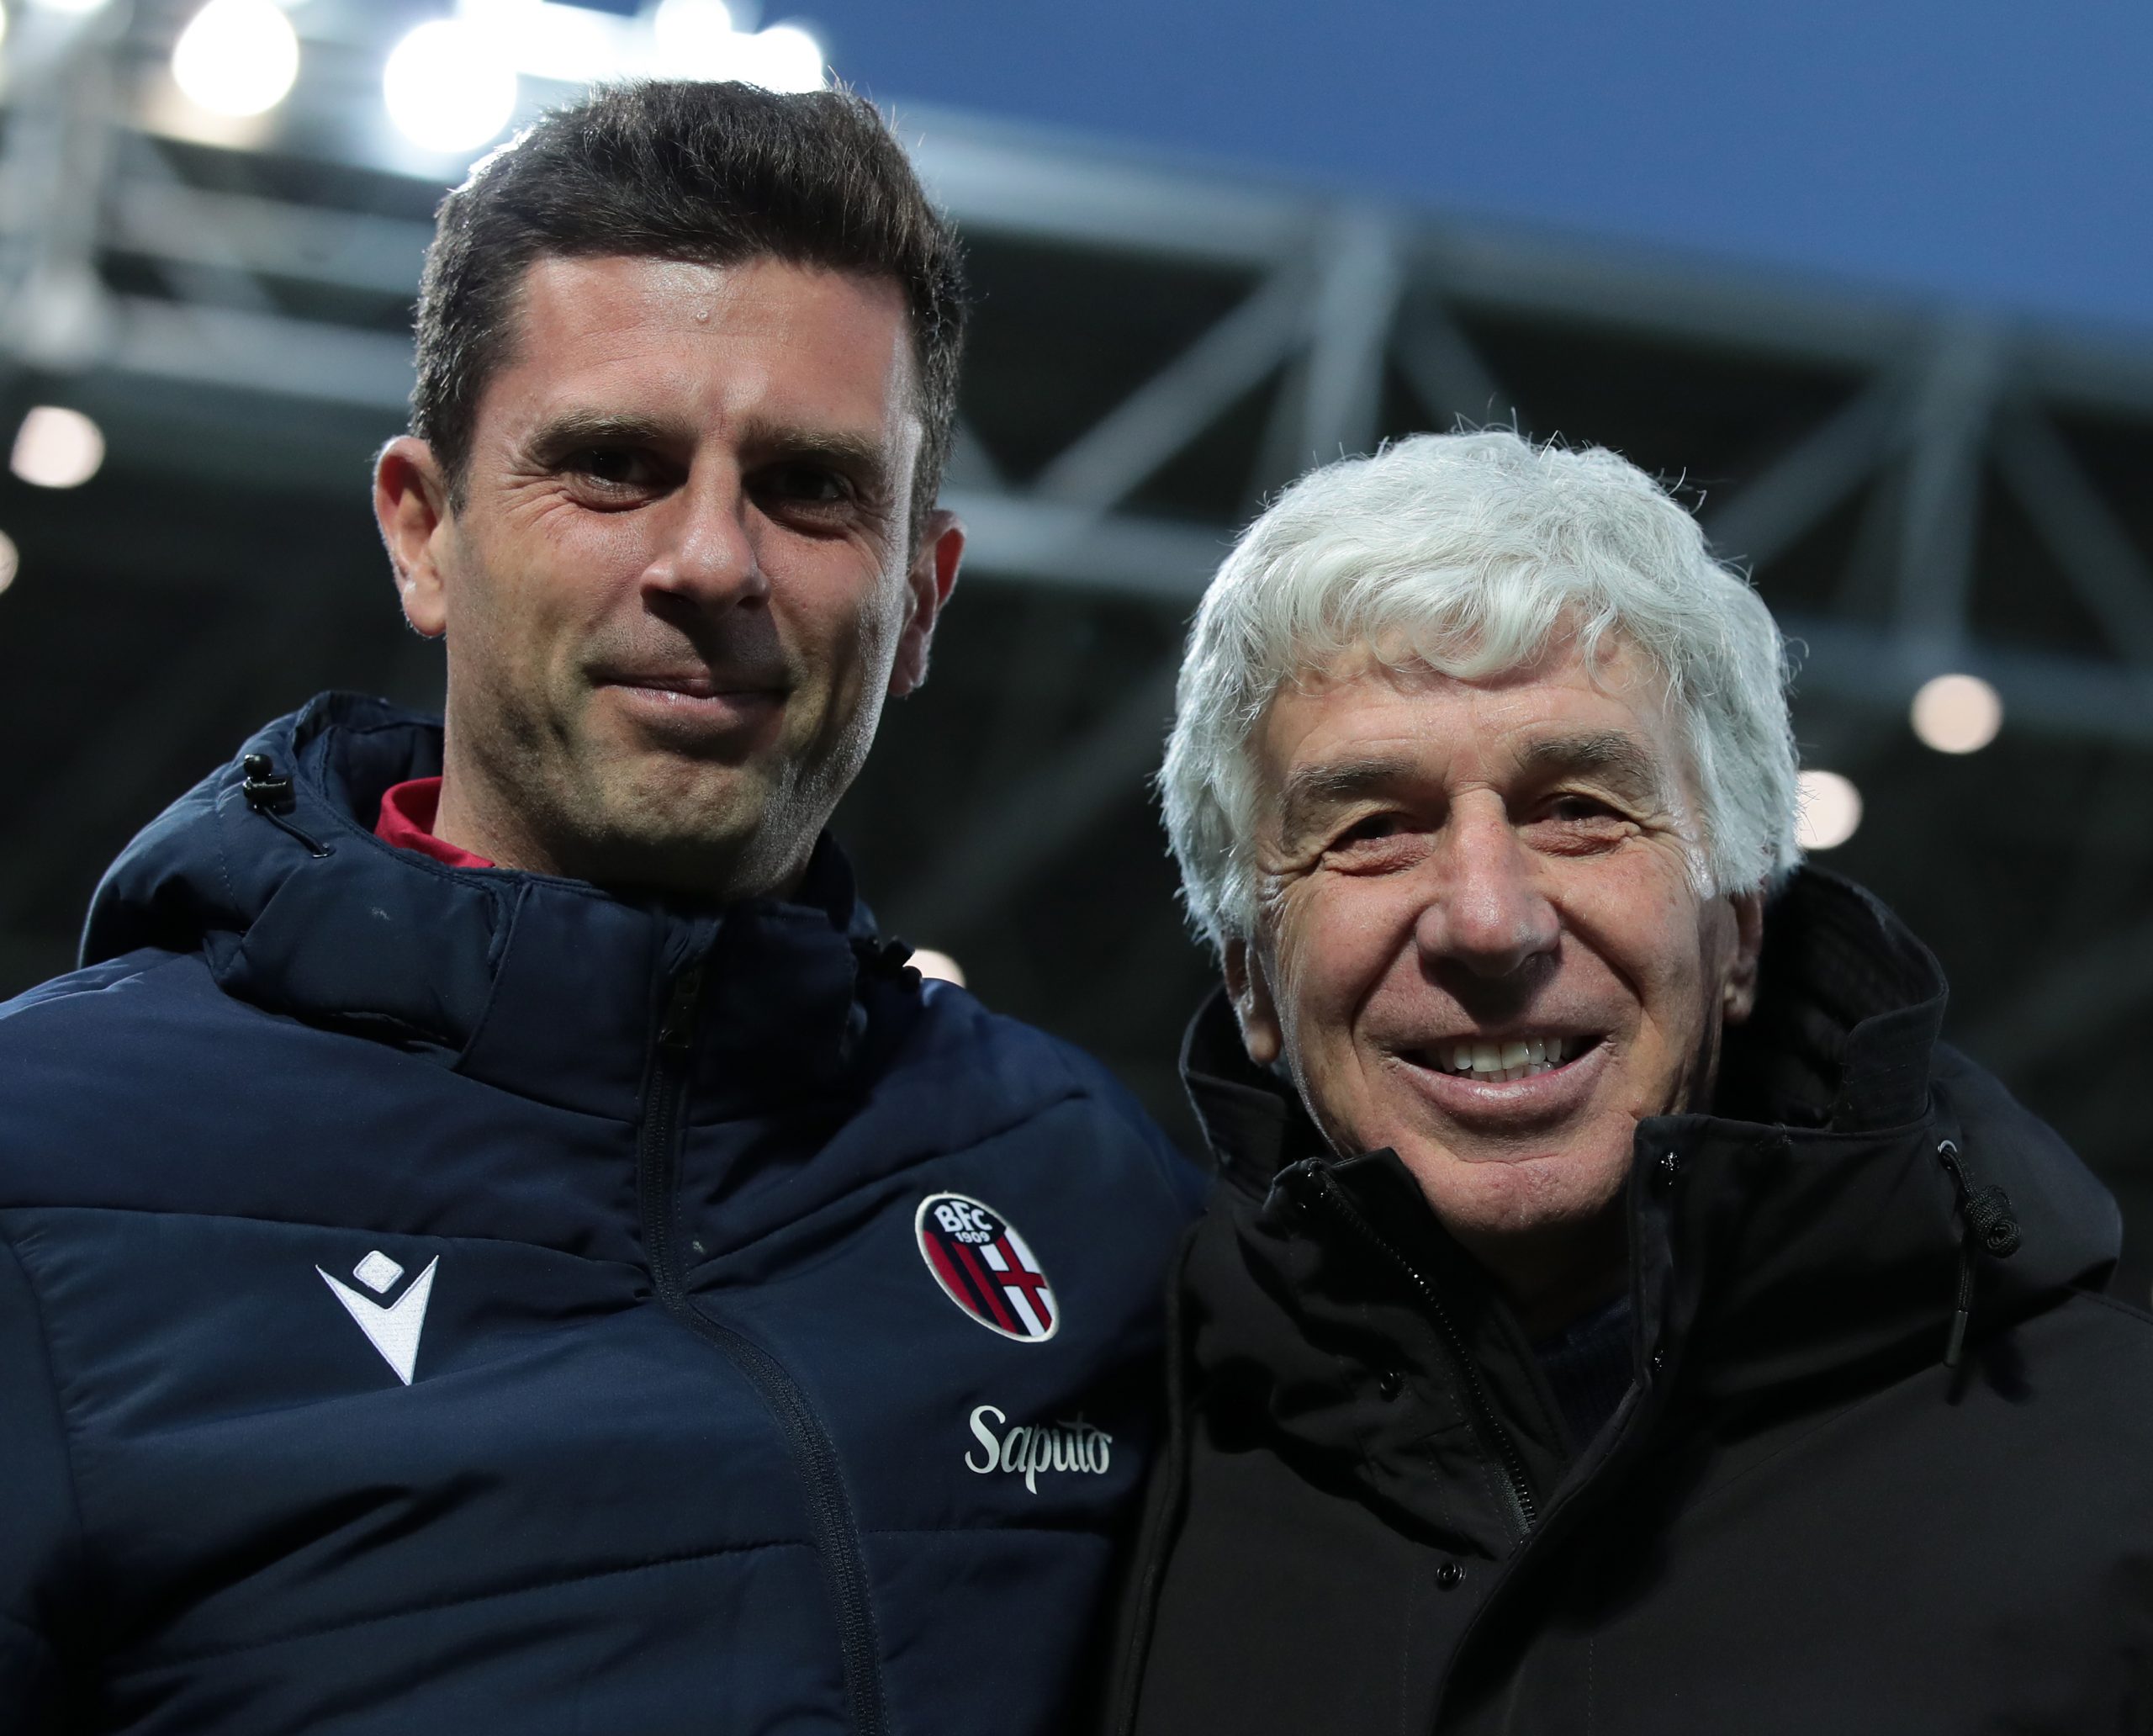 Bologna not interested in letting Thiago Motta go anytime soon